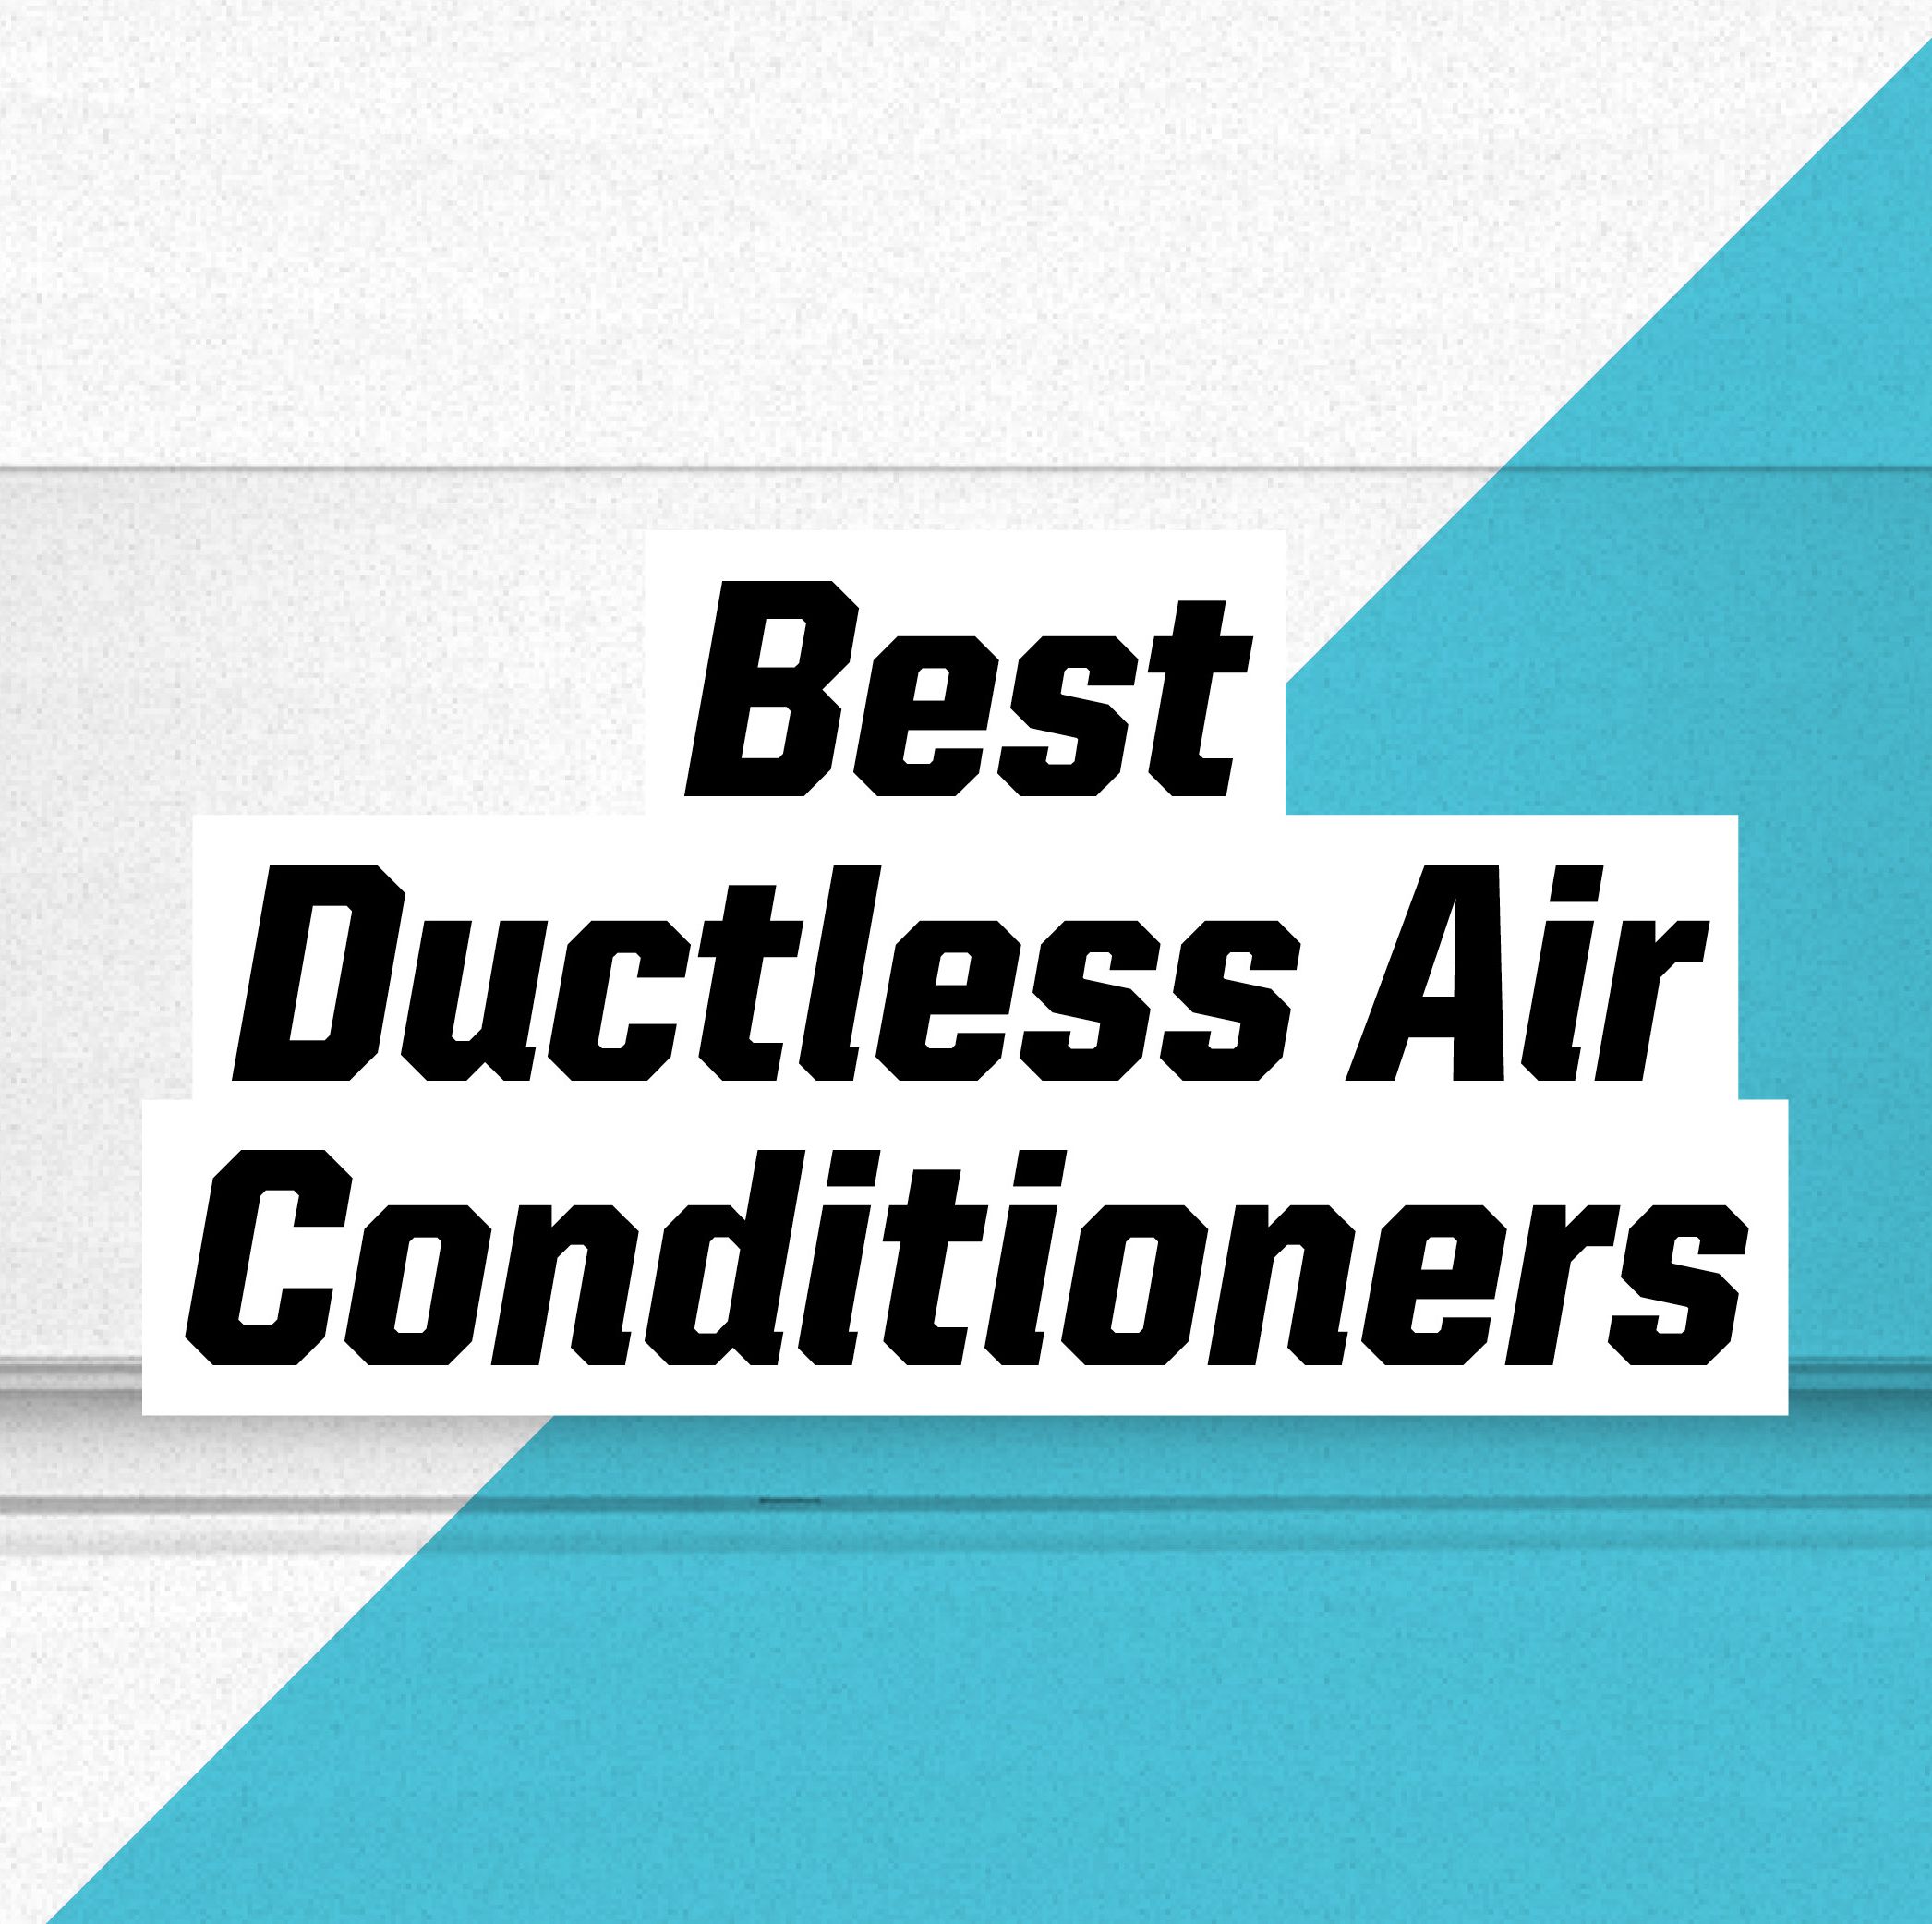 The Best Ductless Air Conditioners for a Cooler Summer